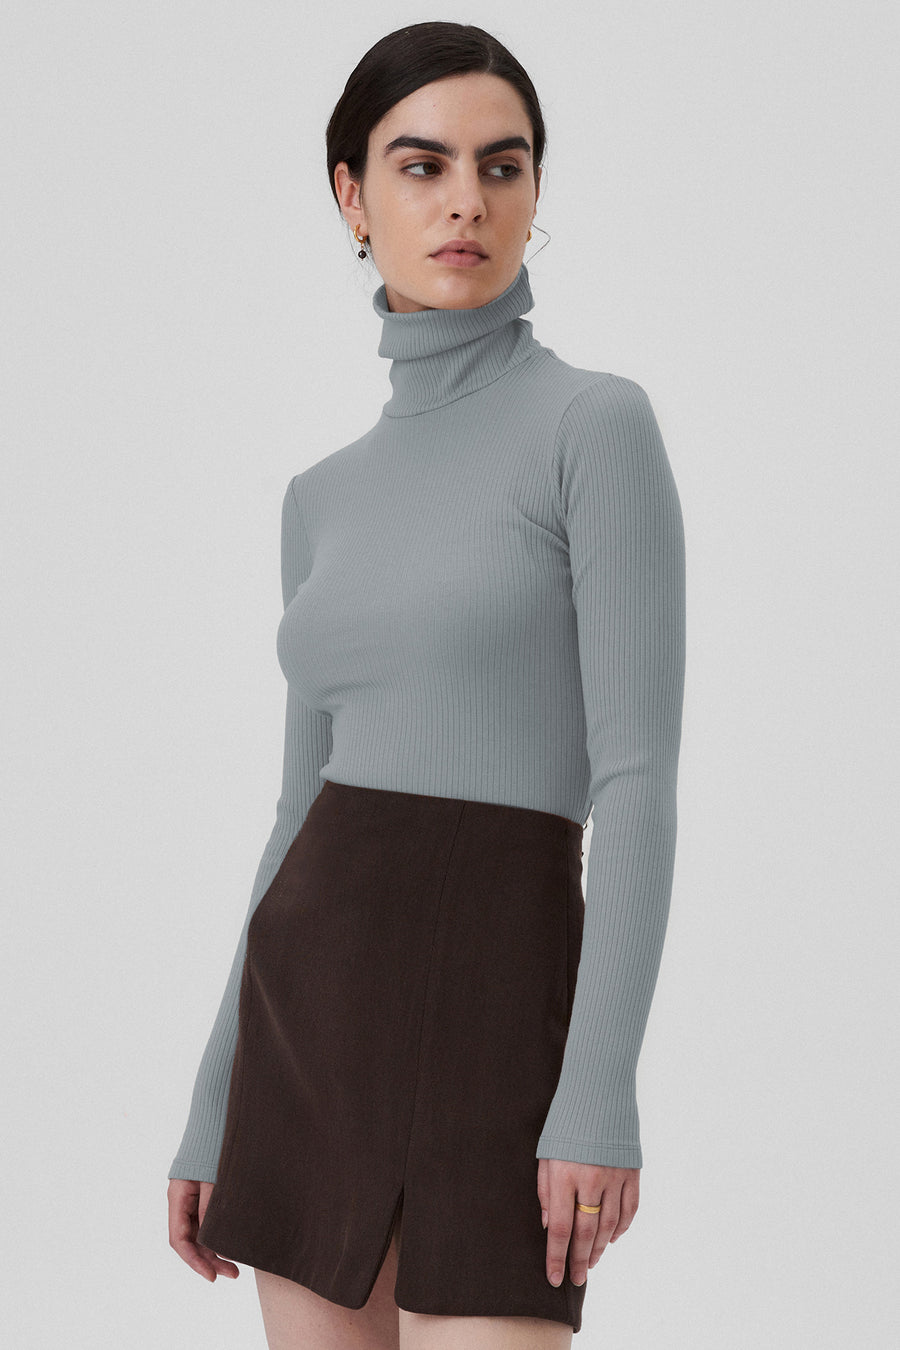 Turtleneck in organic cotton / 15 / 02 / basalt *tencel-skirt-07-02-dark-chocolate* ?The model is 172cm tall and wears size XS? |